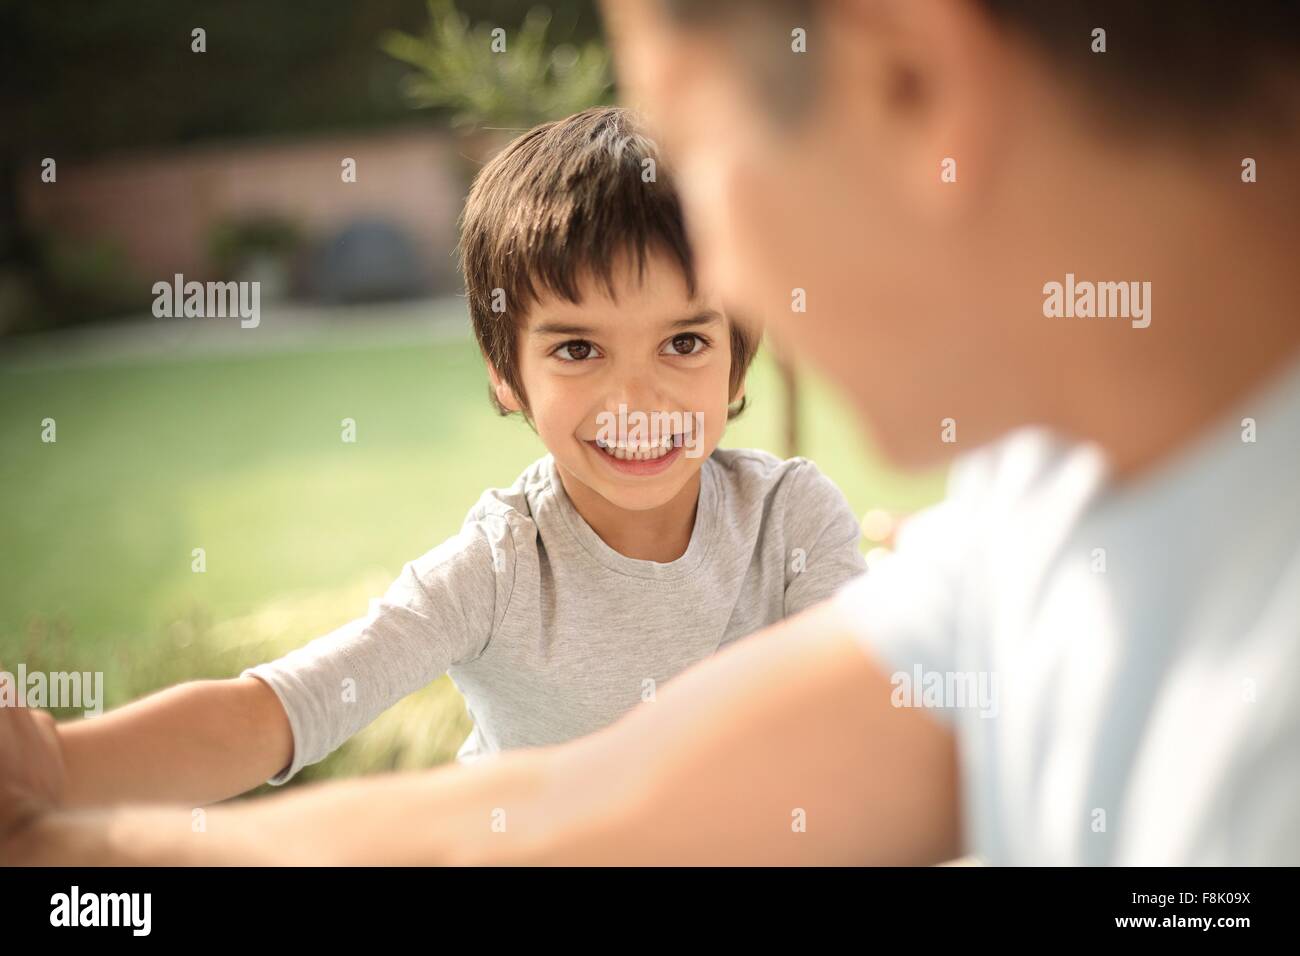 Boy in garden smiling at father, differential focus Stock Photo